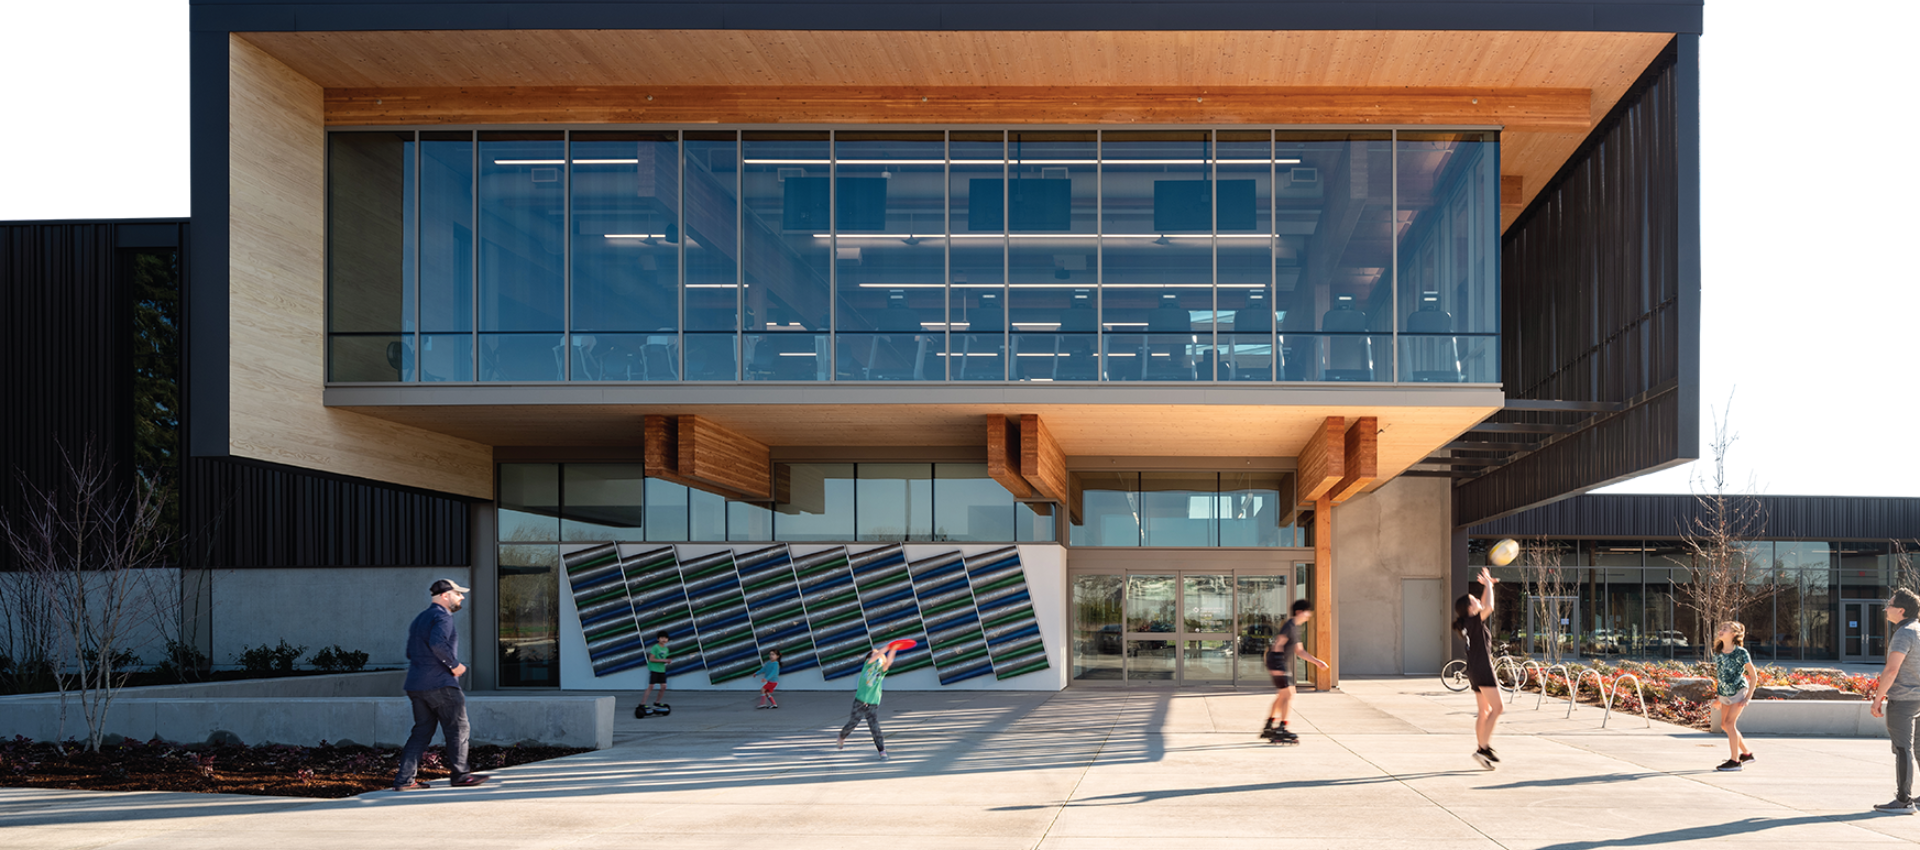 Hidden Creek Community Center in Hillsboro, Oregon - one of the first mass timber community centers in the country